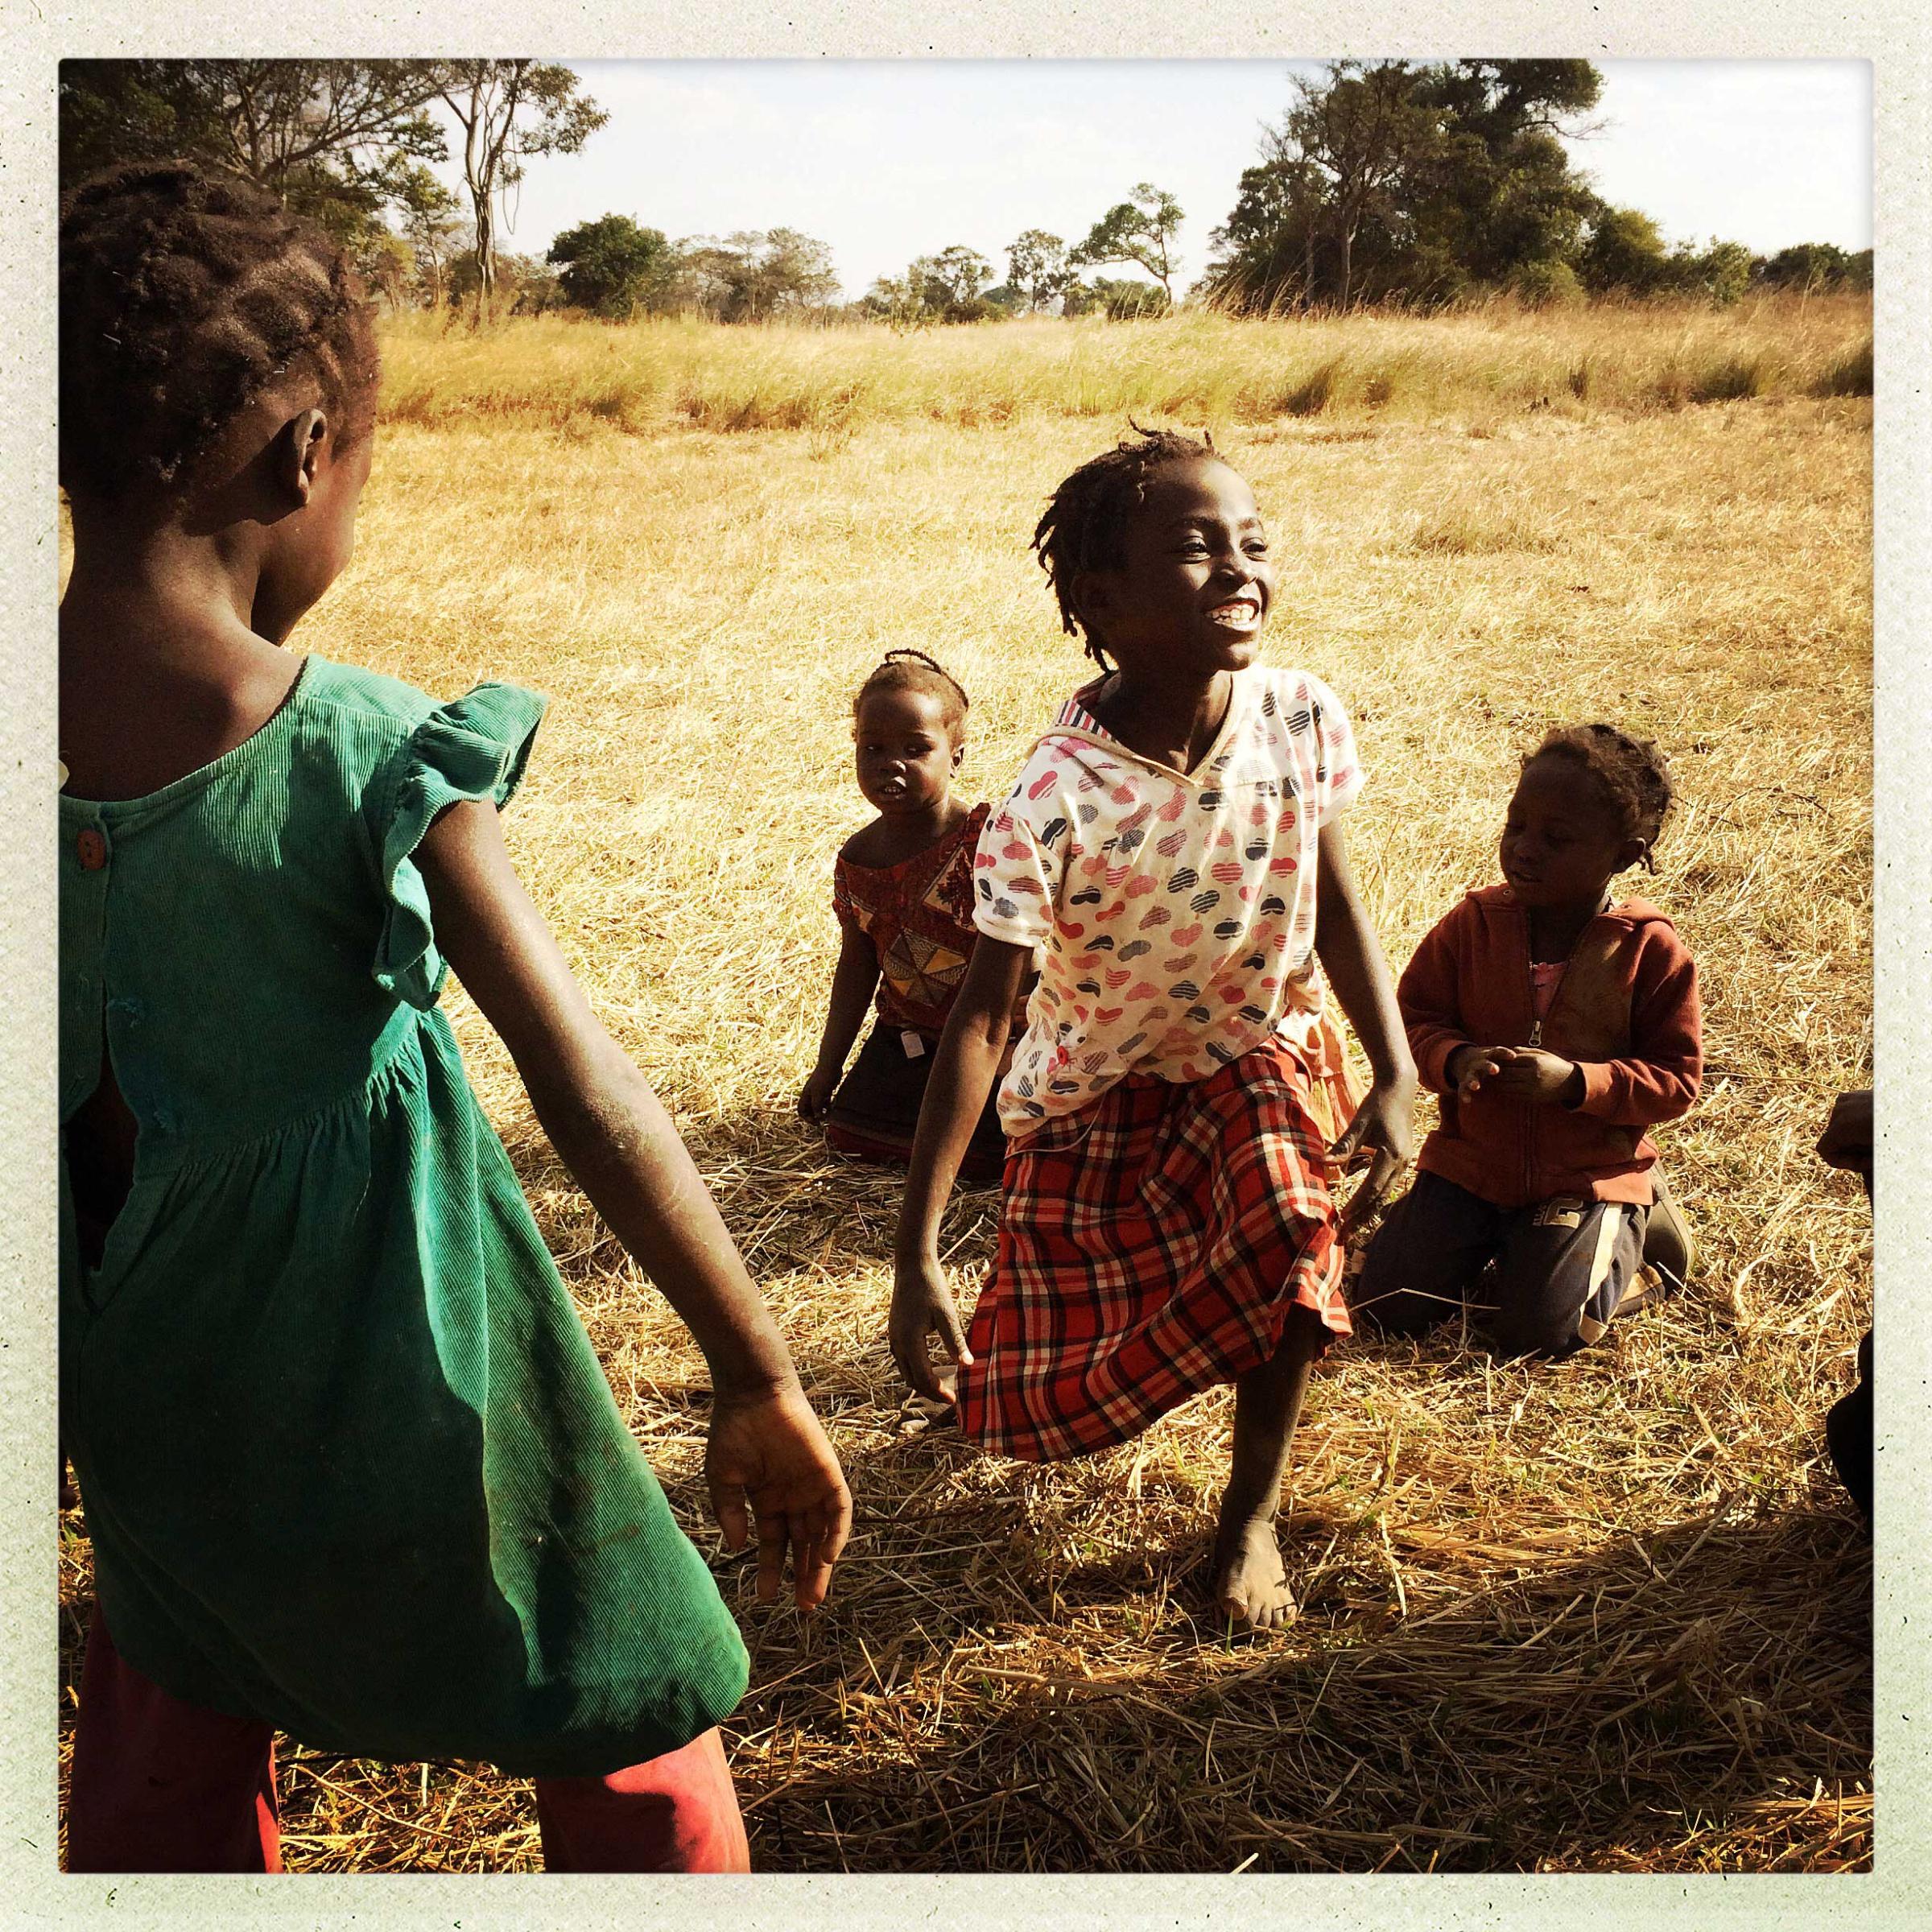 Girls play an afternoon dancing game in a village an hour outside Kabwe, Zambia. Many of the people here are subsistence farmers who grow tomatoes, cabbage, kale, and other food. @i_am_idil